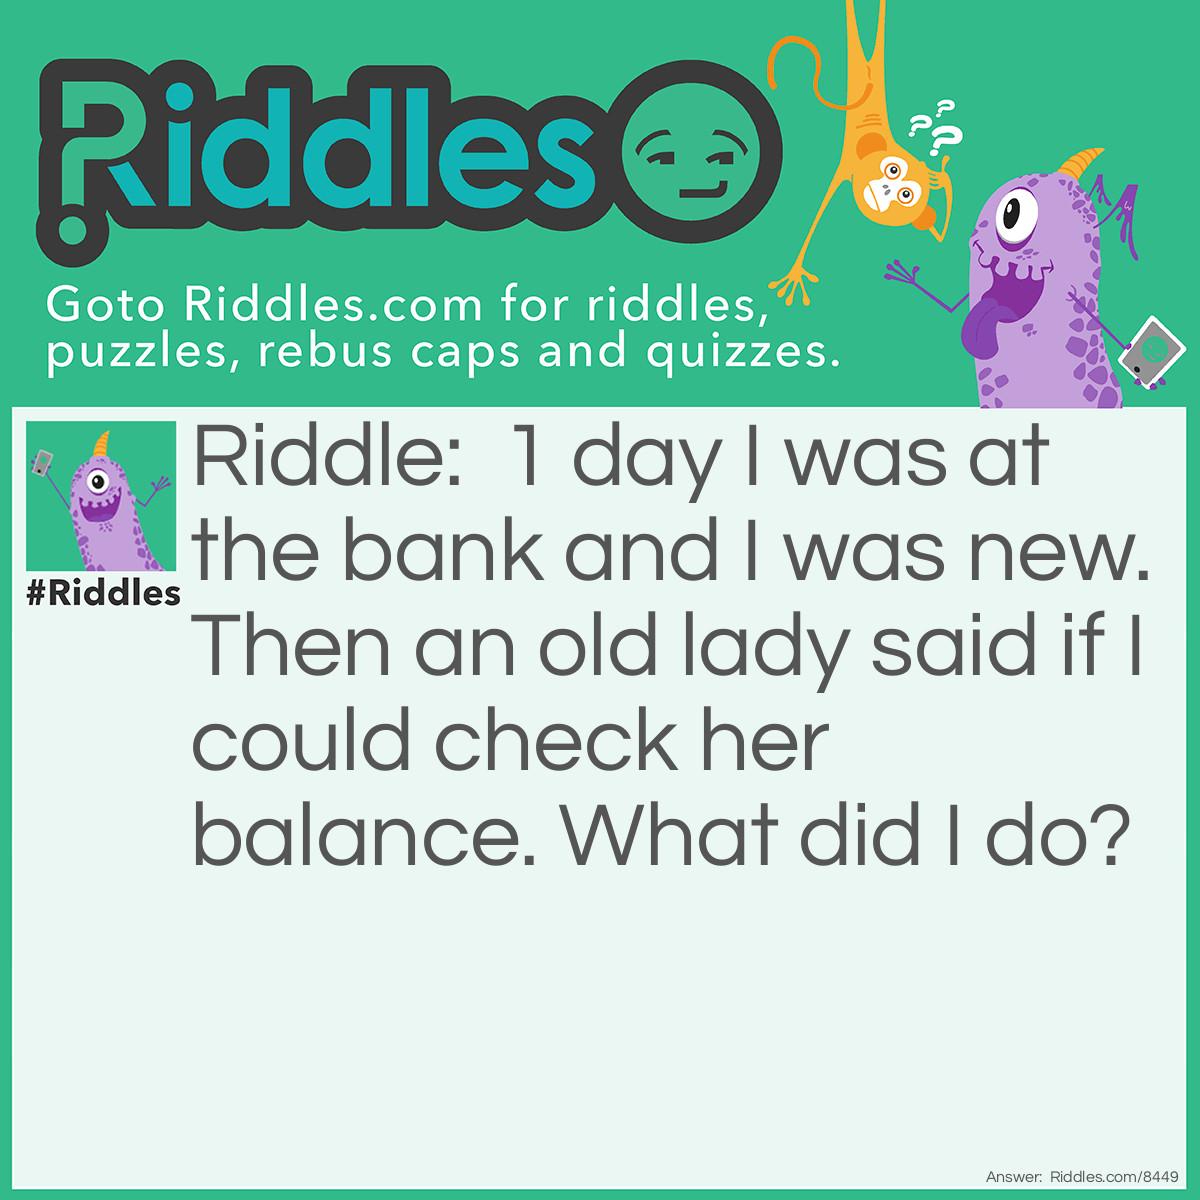 Riddle: 1 day I was at the bank and I was new. Then an old lady said if I could check her balance. What did I do? Answer: I pushed her over.